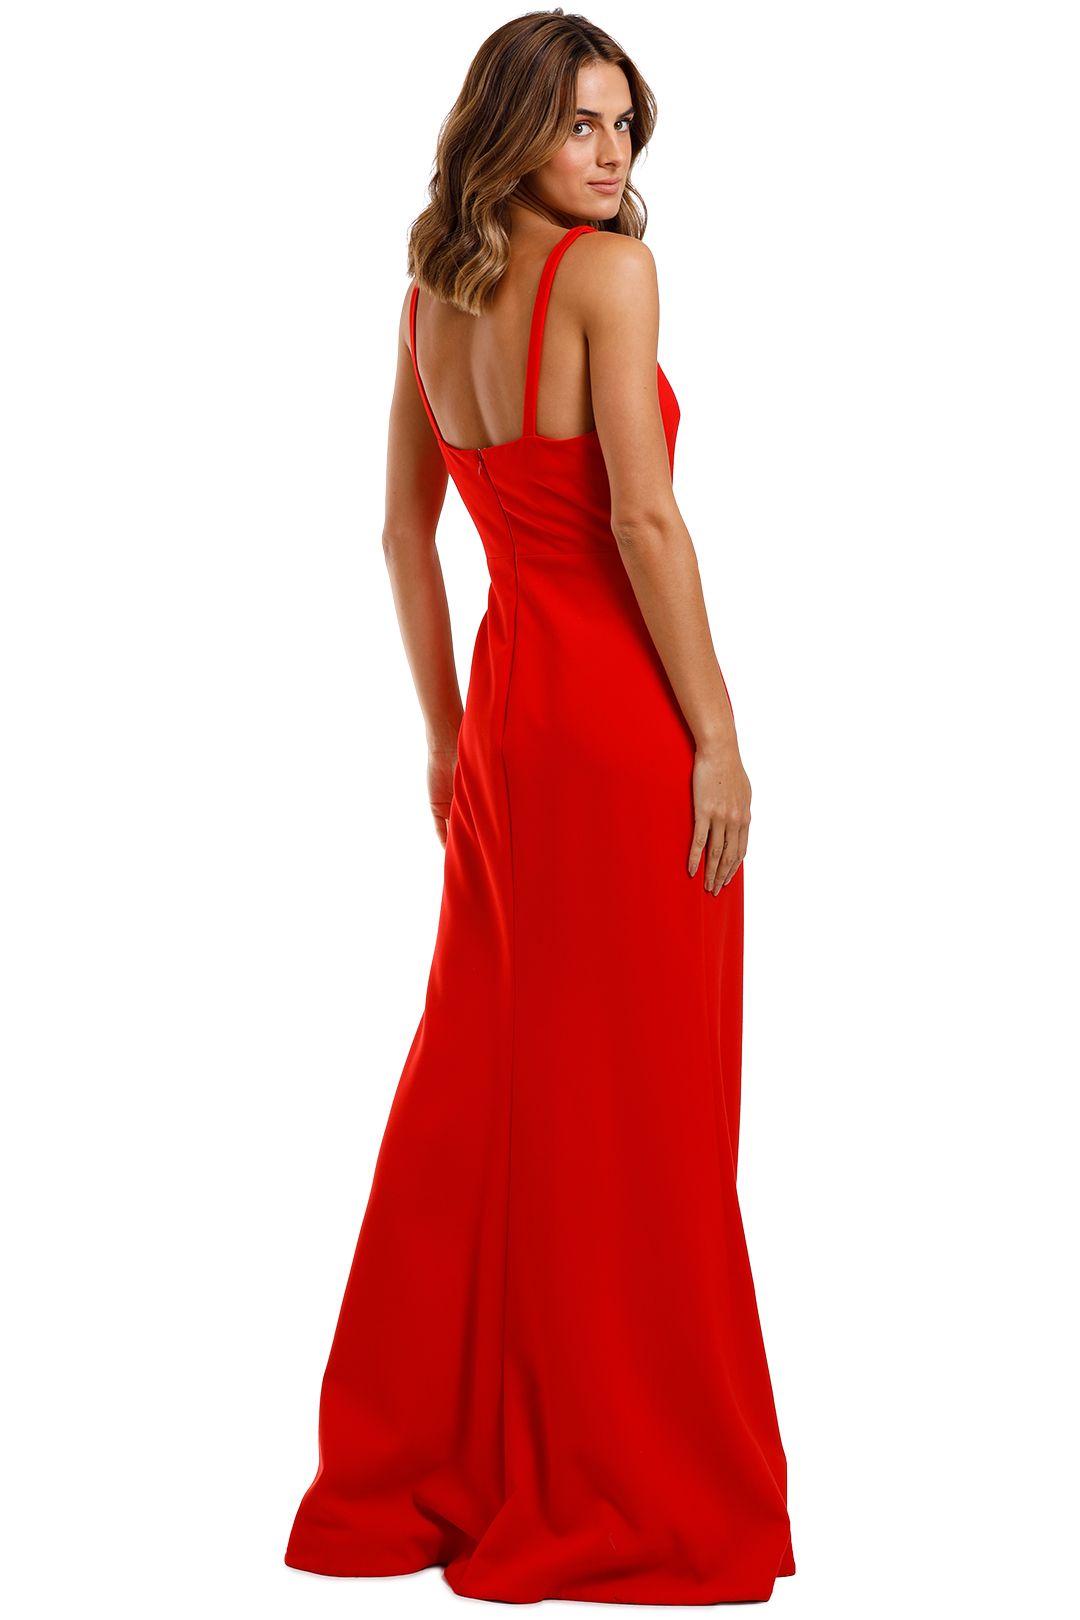 Likely NYC Constance Gown Scarlet Bodycon